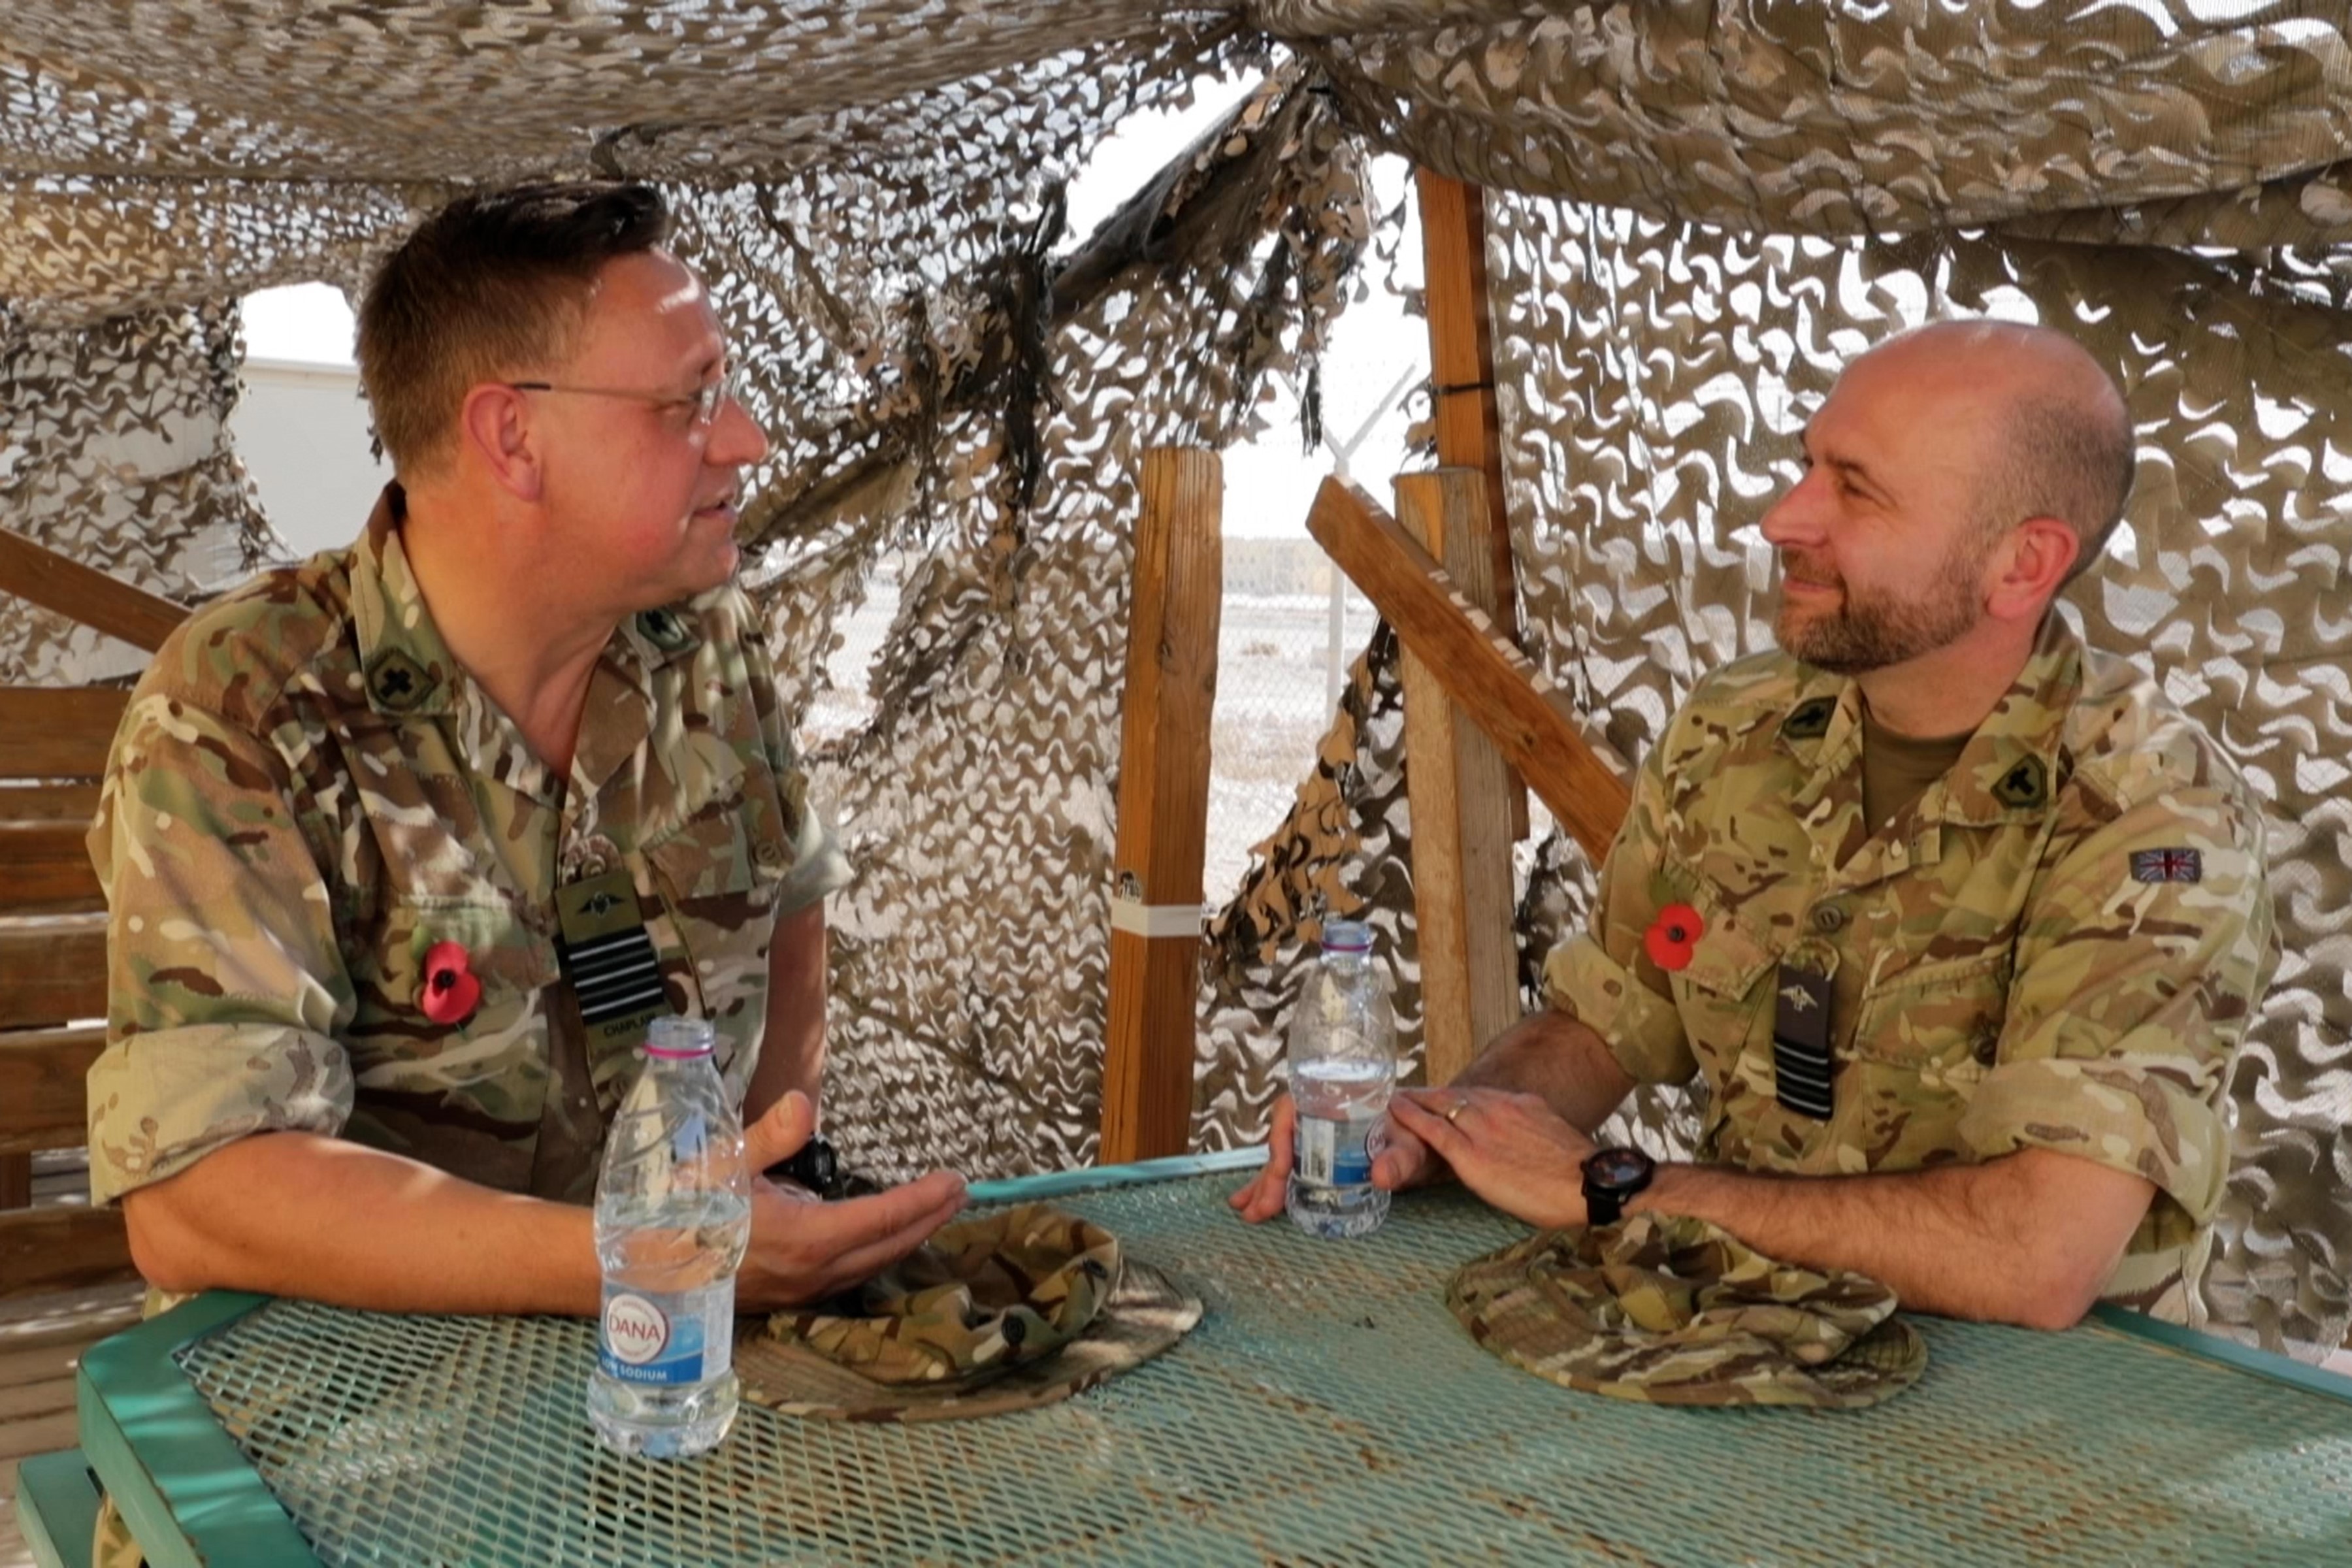 Image shows RAF aviators sitting at a table under a temporary tent structure.